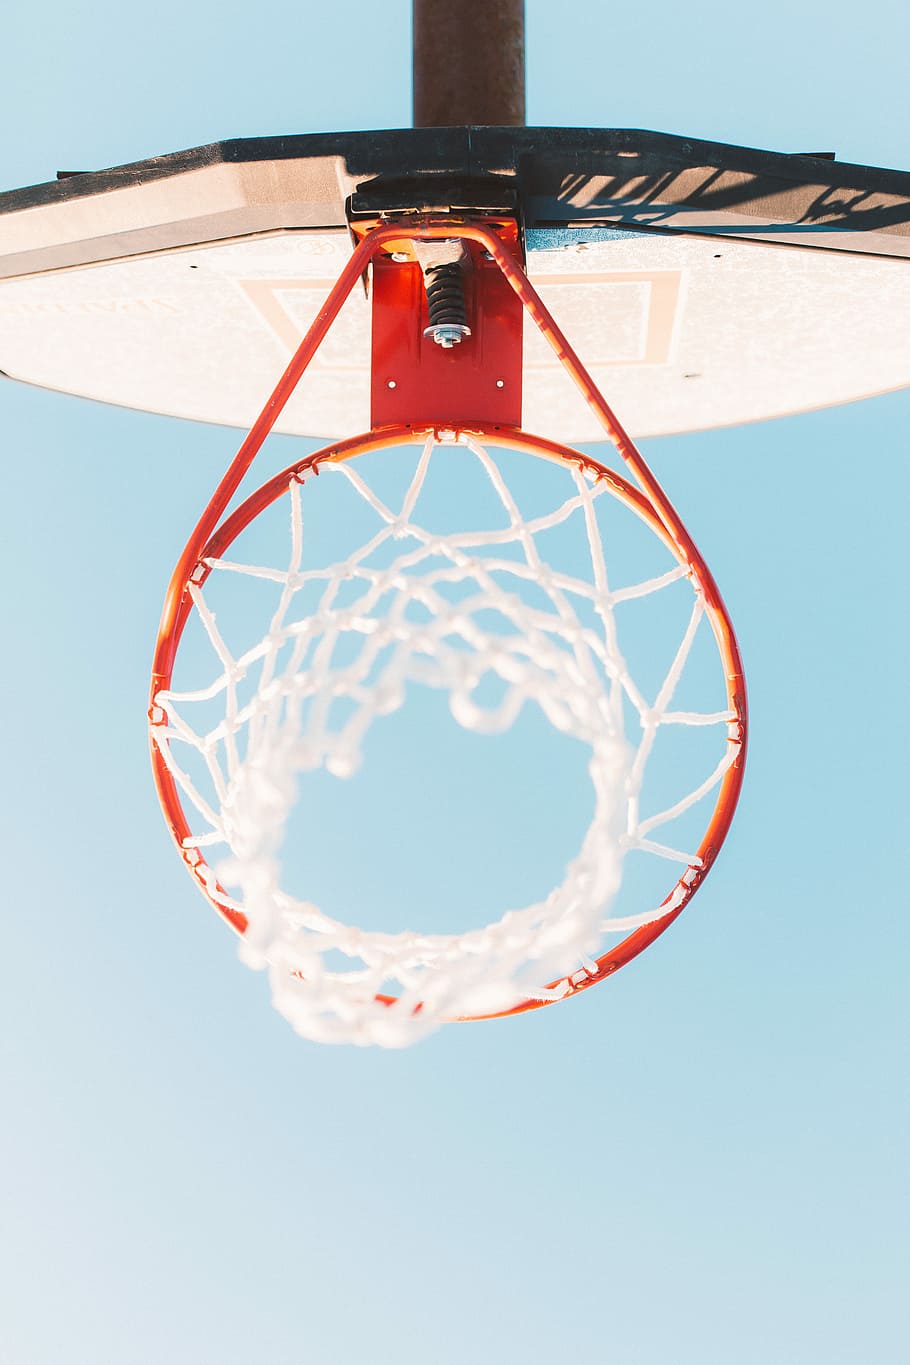 Basketball Wallpapers Android क लए APK डउनलड कर